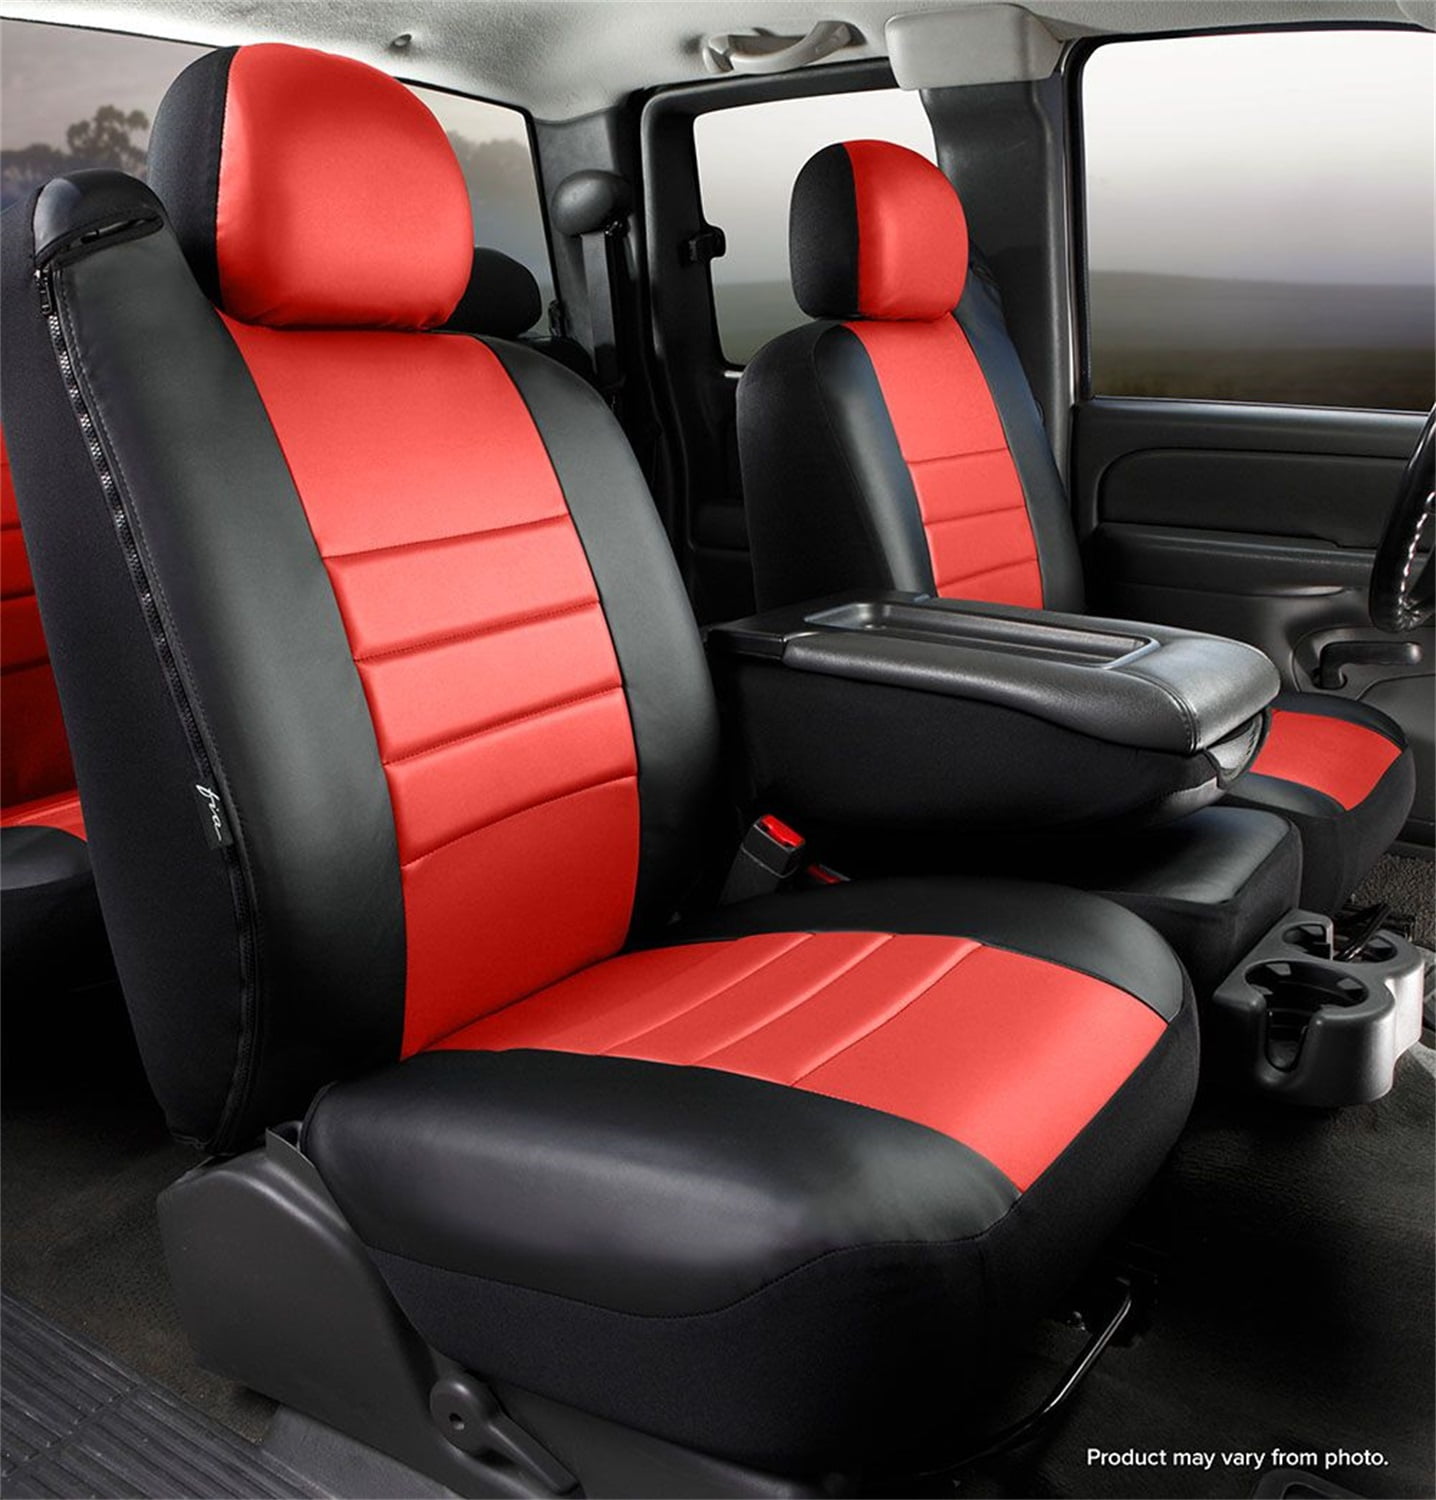 Leatherette, Black w/Red Center Panel Fia SL62-83 RED Custom Fit Rear Seat Cover Split Seat 60/40